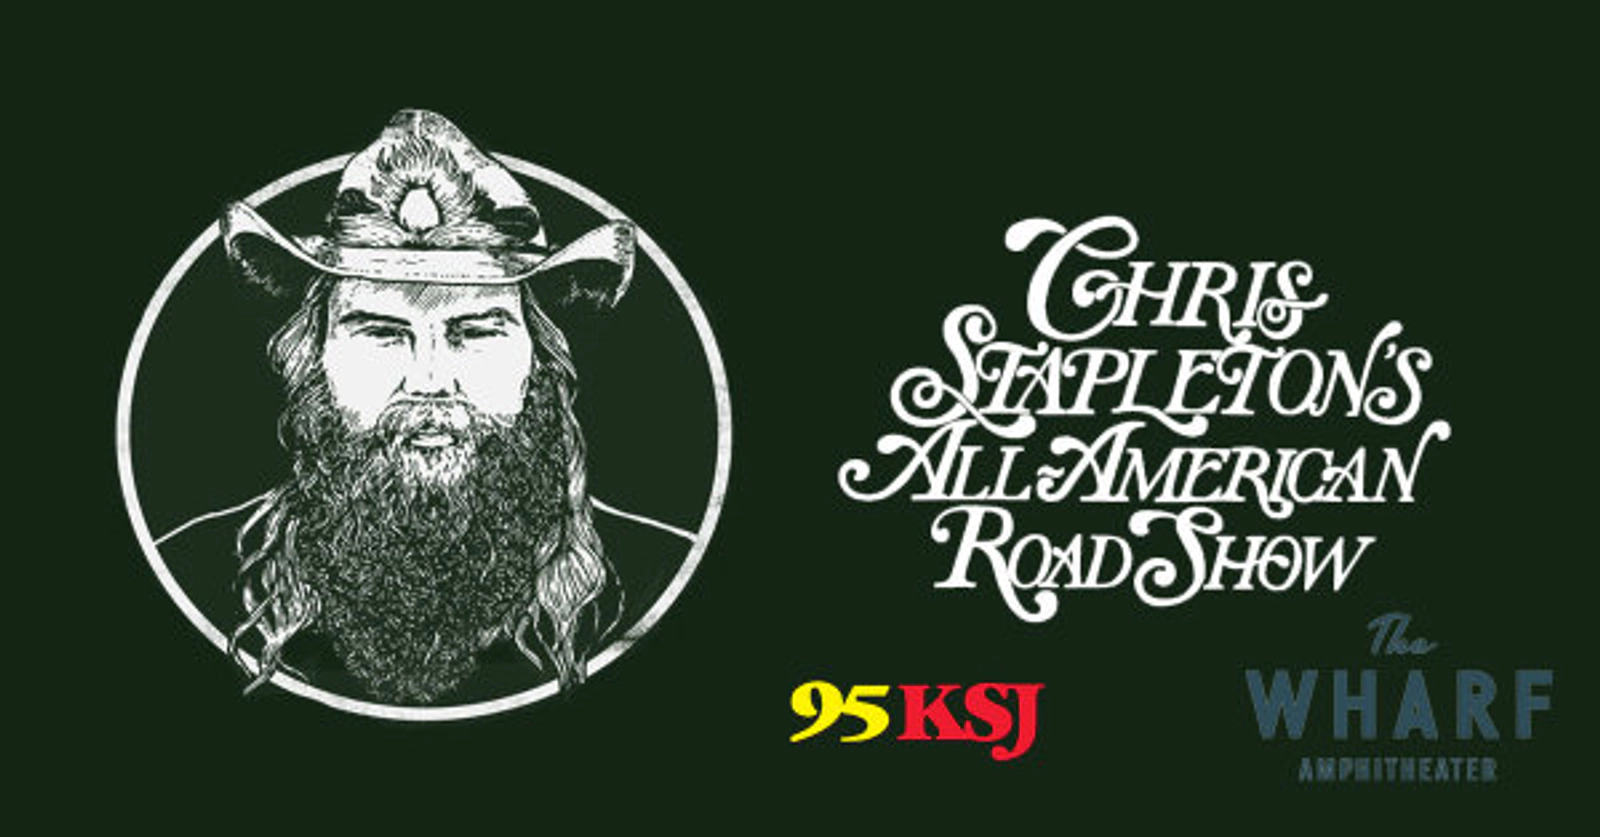  Win Tickets to see Chris Stapleton at the Wharf!  - Thumbnail Image